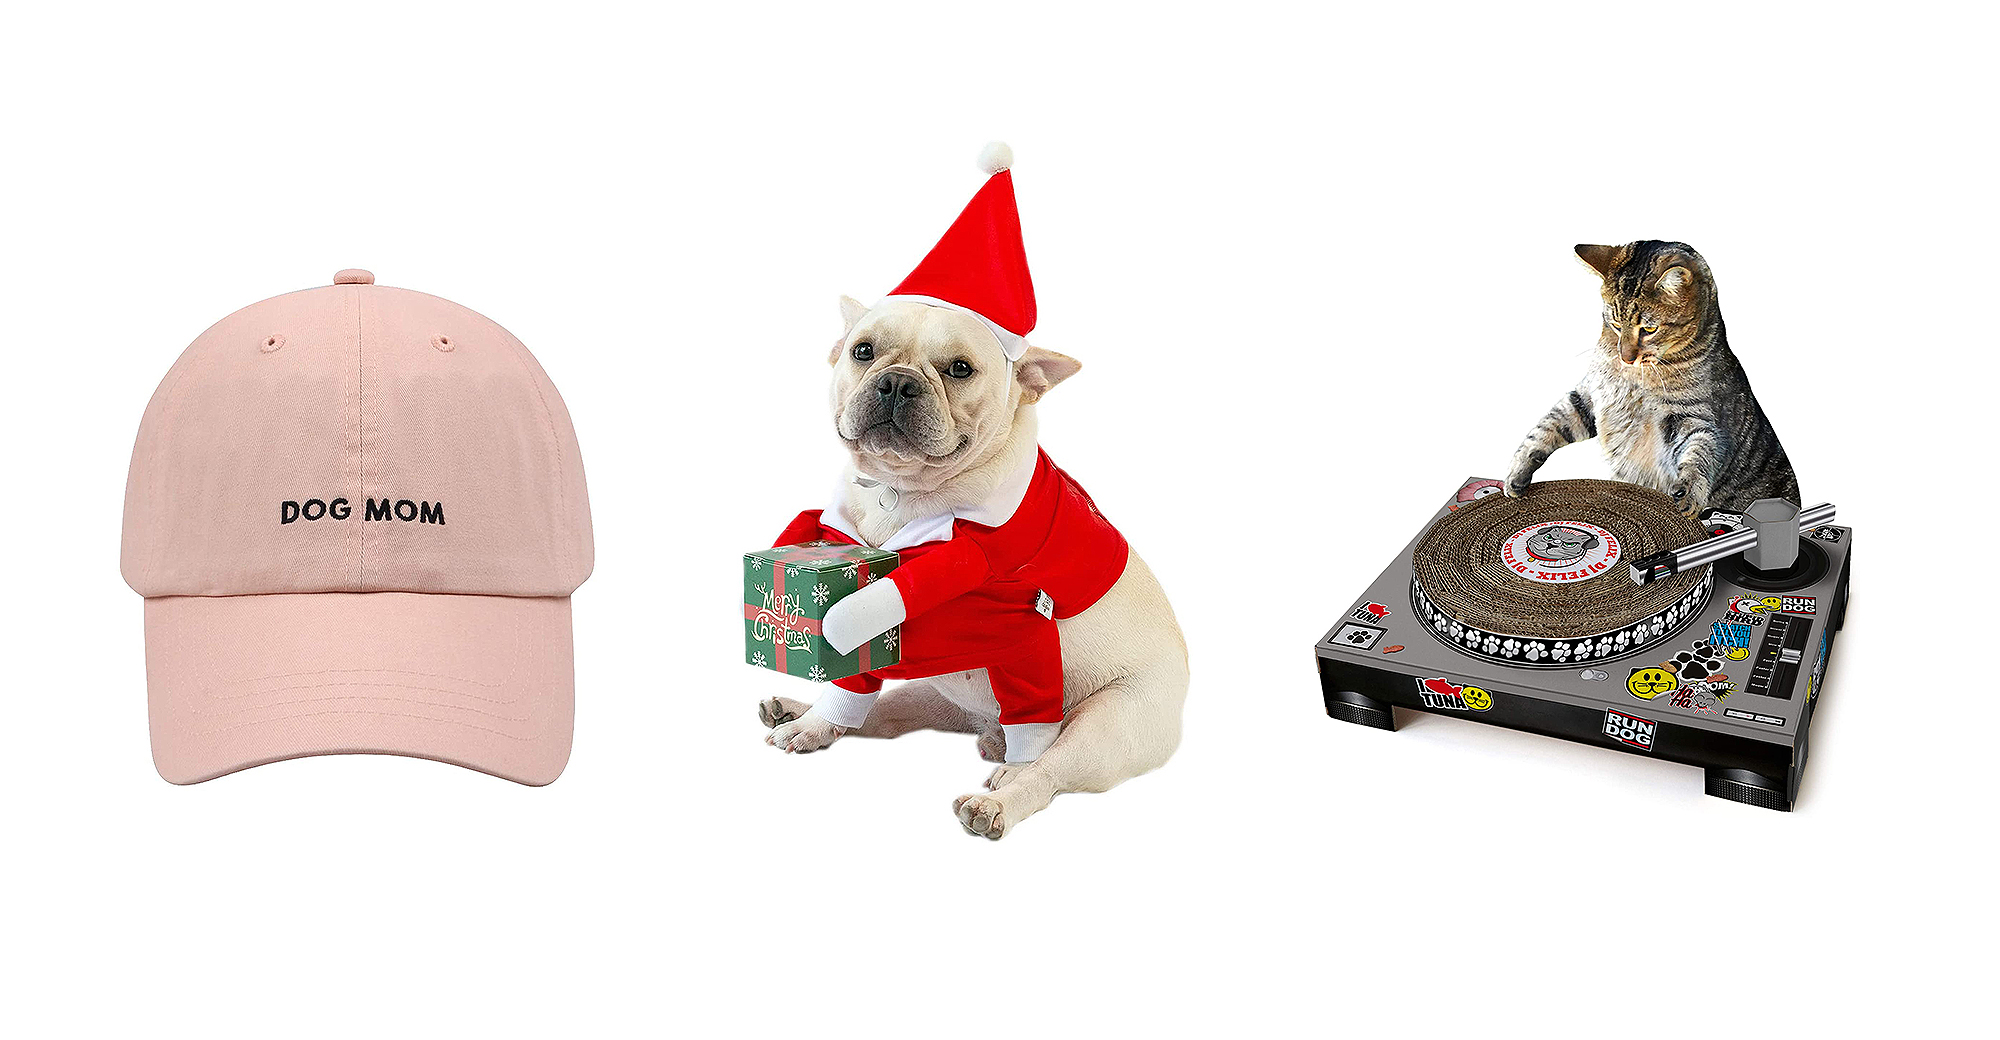 https://www.usmagazine.com/wp-content/uploads/2021/10/holiday-gifts-pet-lovers.jpg?quality=86&strip=all